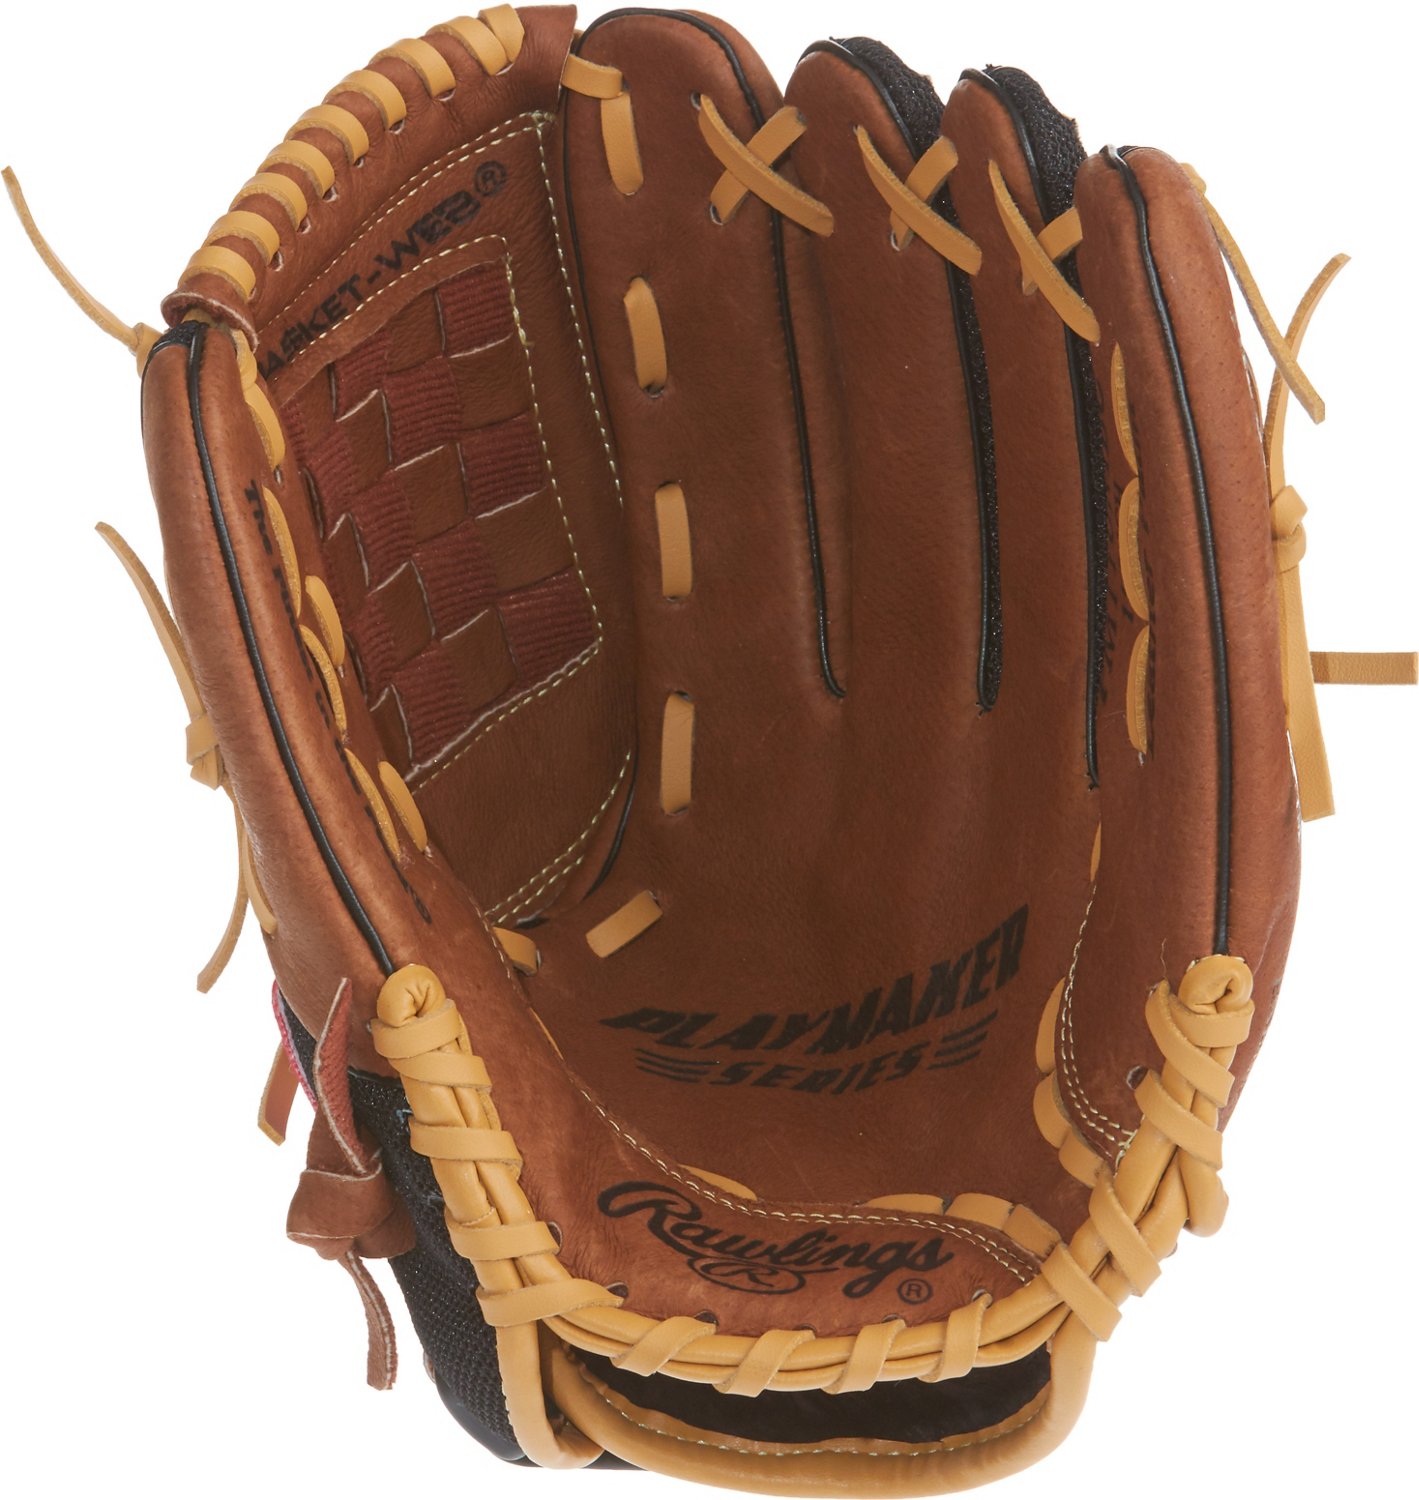 Details about   Rawlings Pm11bsr 11" Inch Kid Boy Baseball Glove Mitt Red Black Playmaker Series 